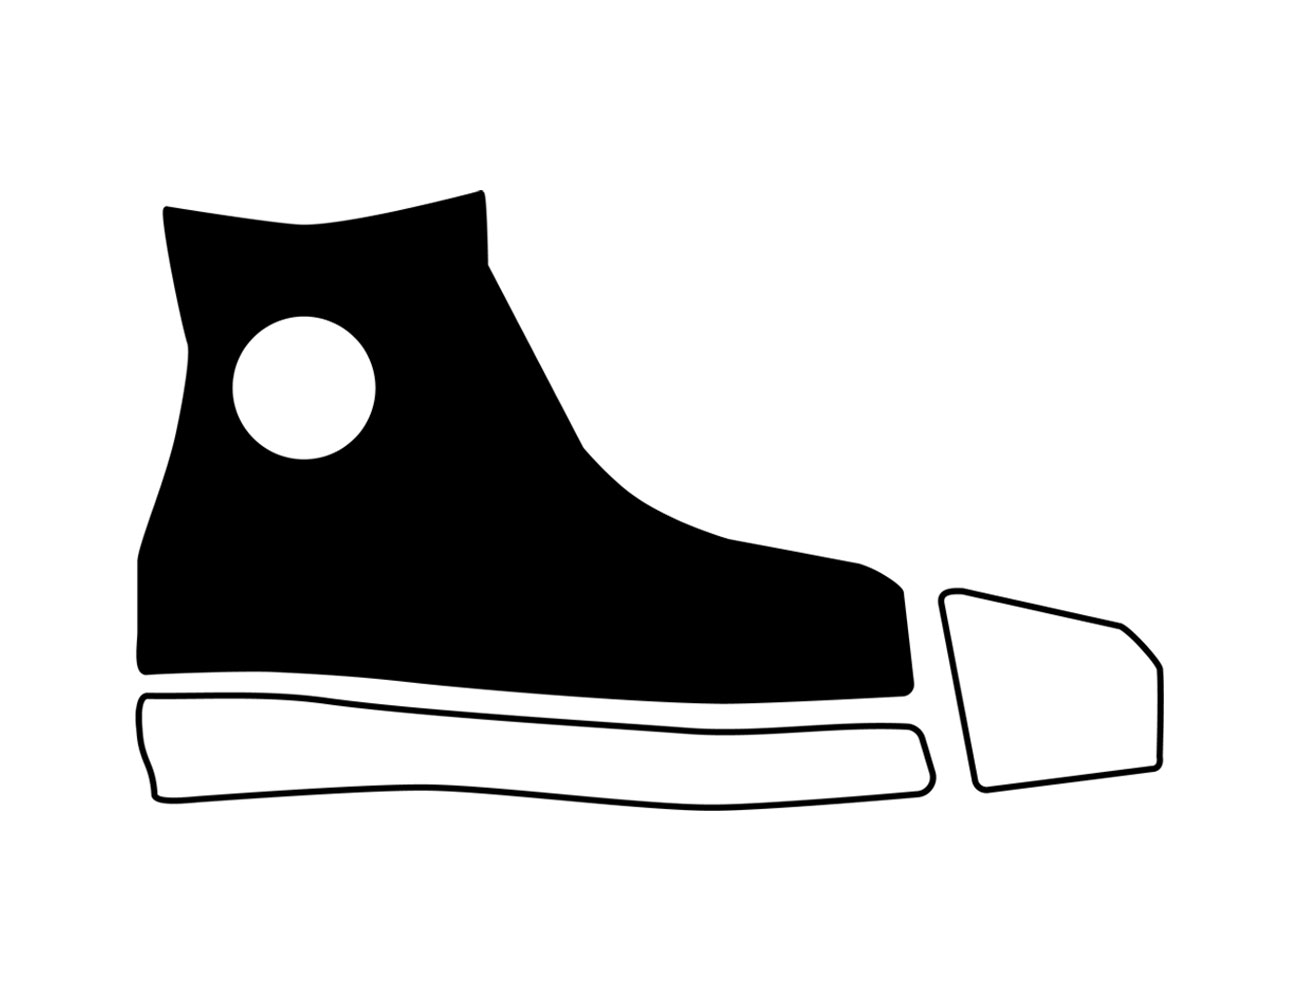 Shoe drawing eight: black silhouette combined with a knocked-out sole and toe.